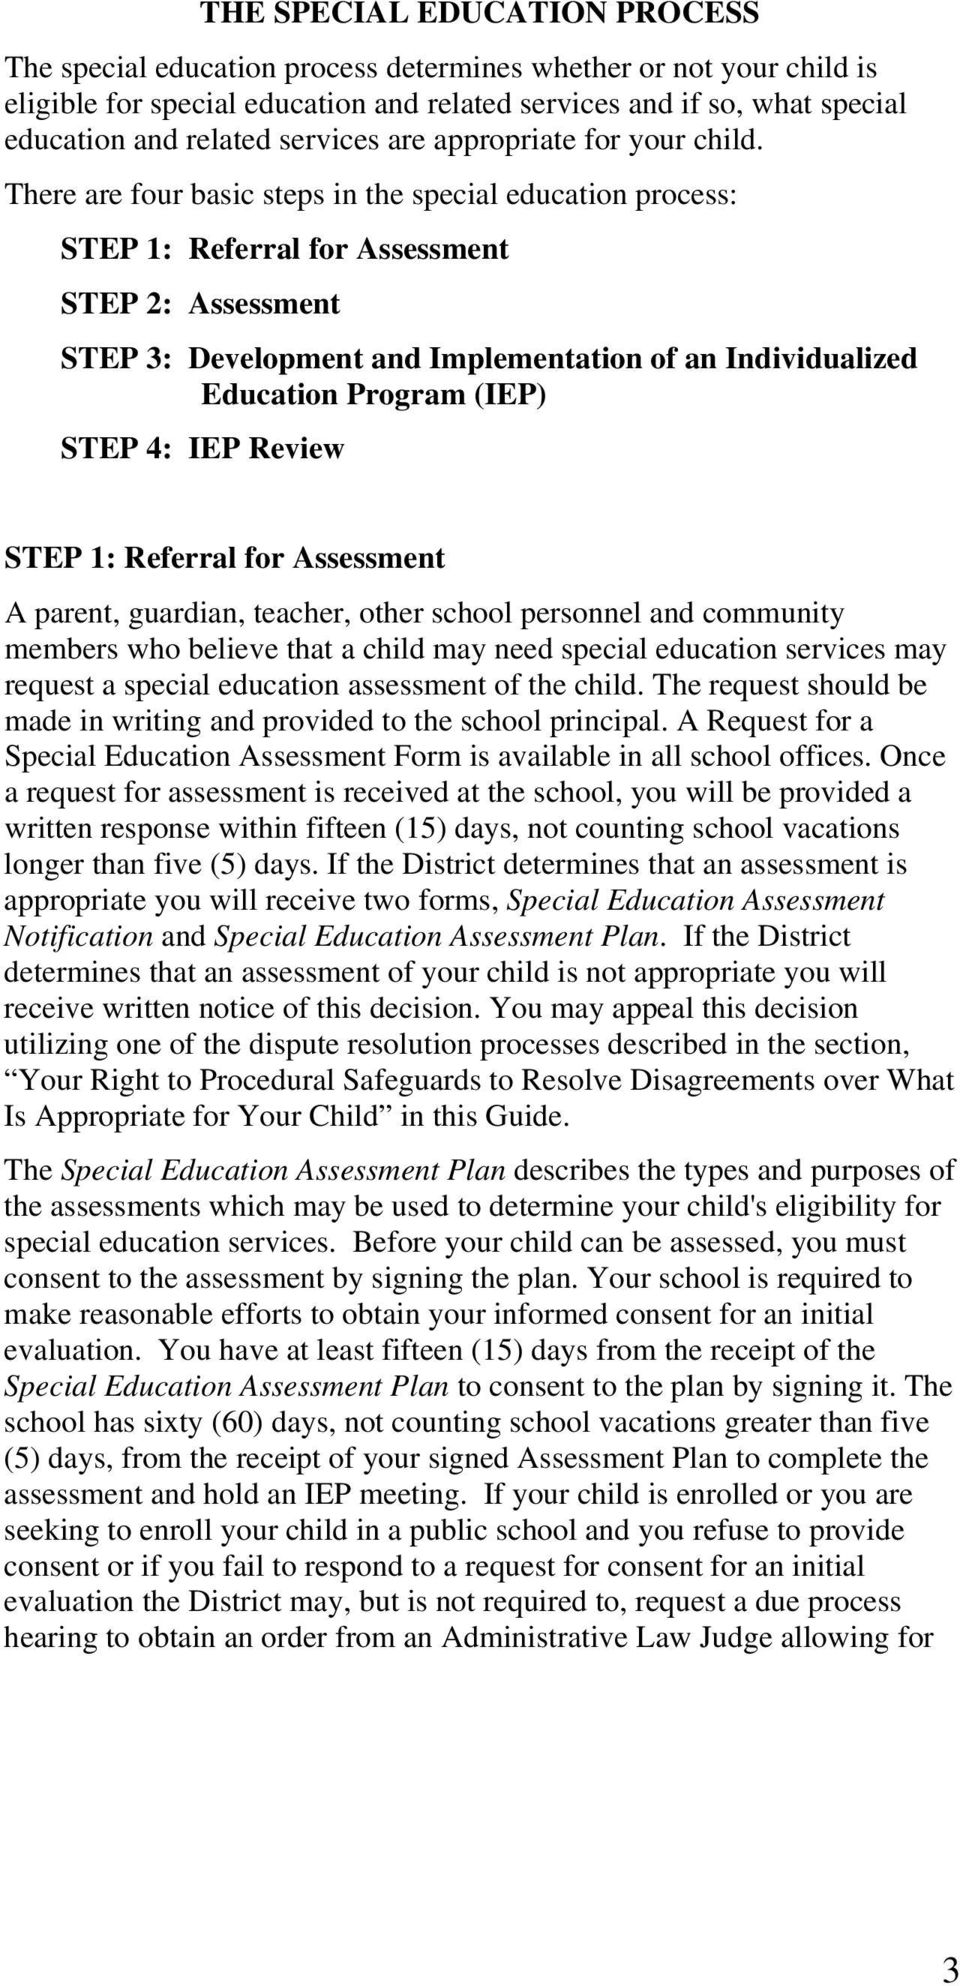 There are four basic steps in the special education process: STEP 1: Referral for Assessment STEP 2: Assessment STEP 3: Development and Implementation of an Individualized Education Program (IEP)